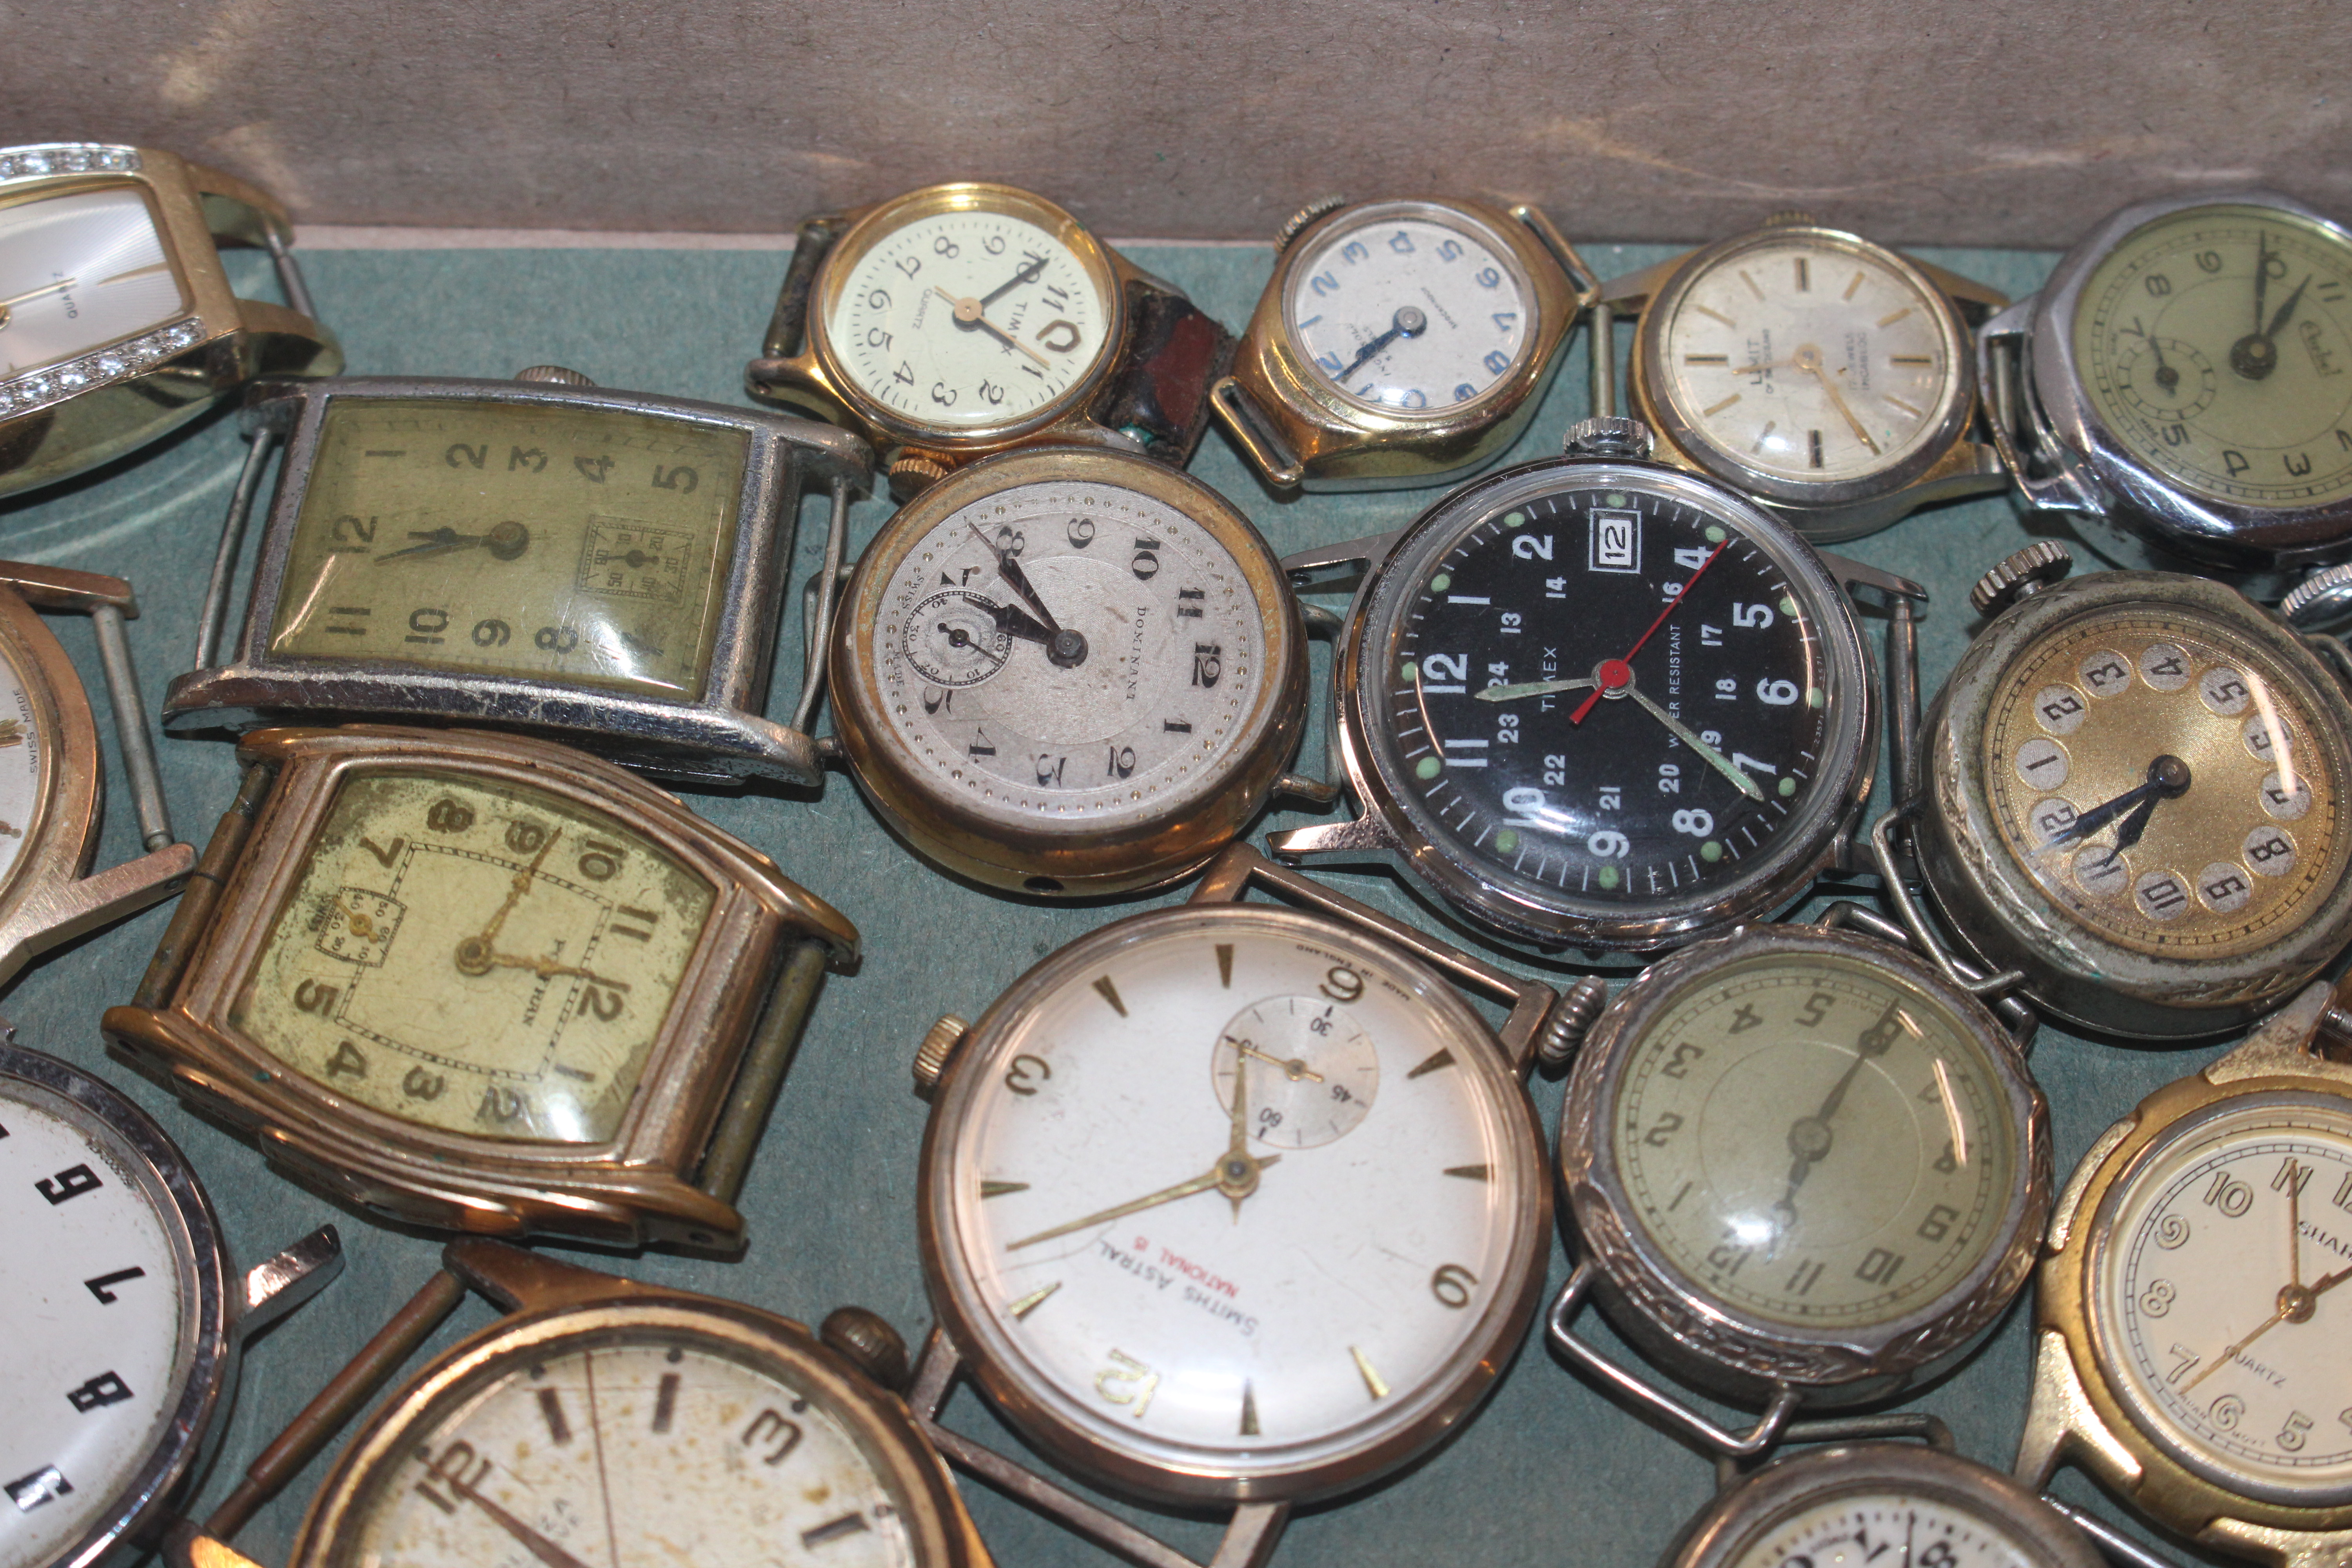 A tray of vintage and other watches for spares and - Image 4 of 8